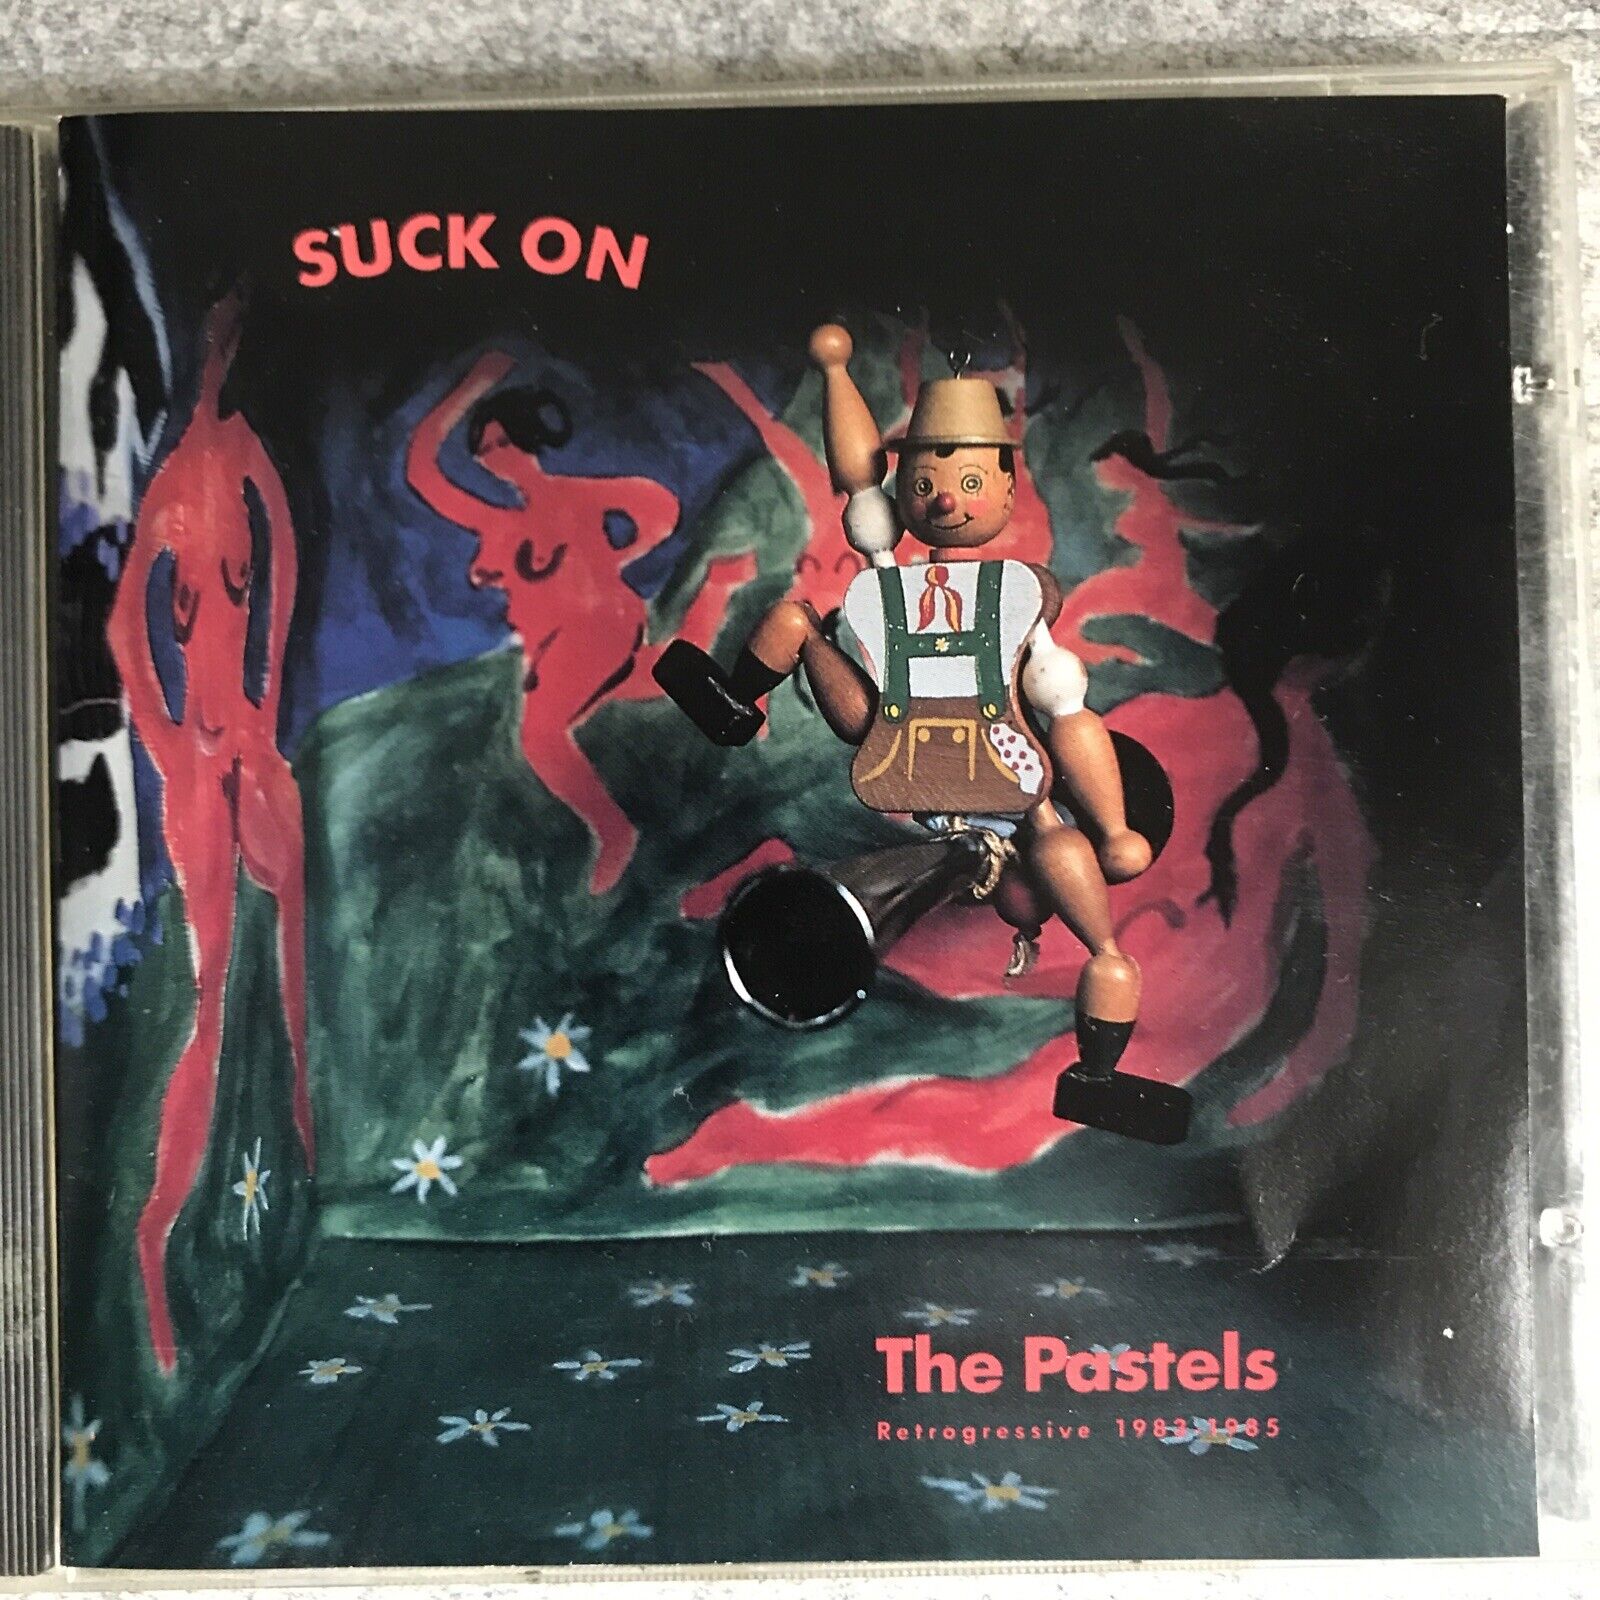 The Pastels : Suck On (CD) ROCK6048-2